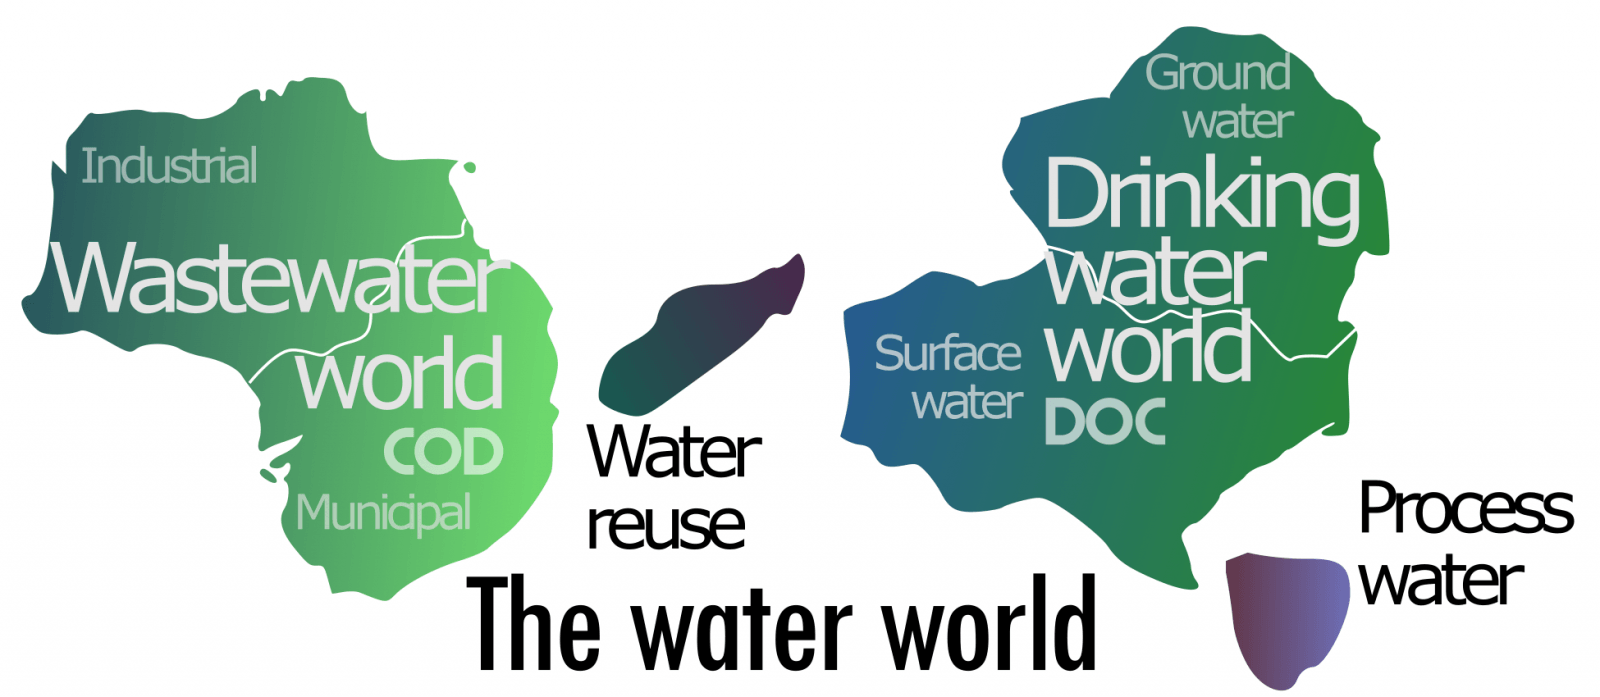 Wastewater Logo - The wastewater and drinking water worlds: two continents drifting